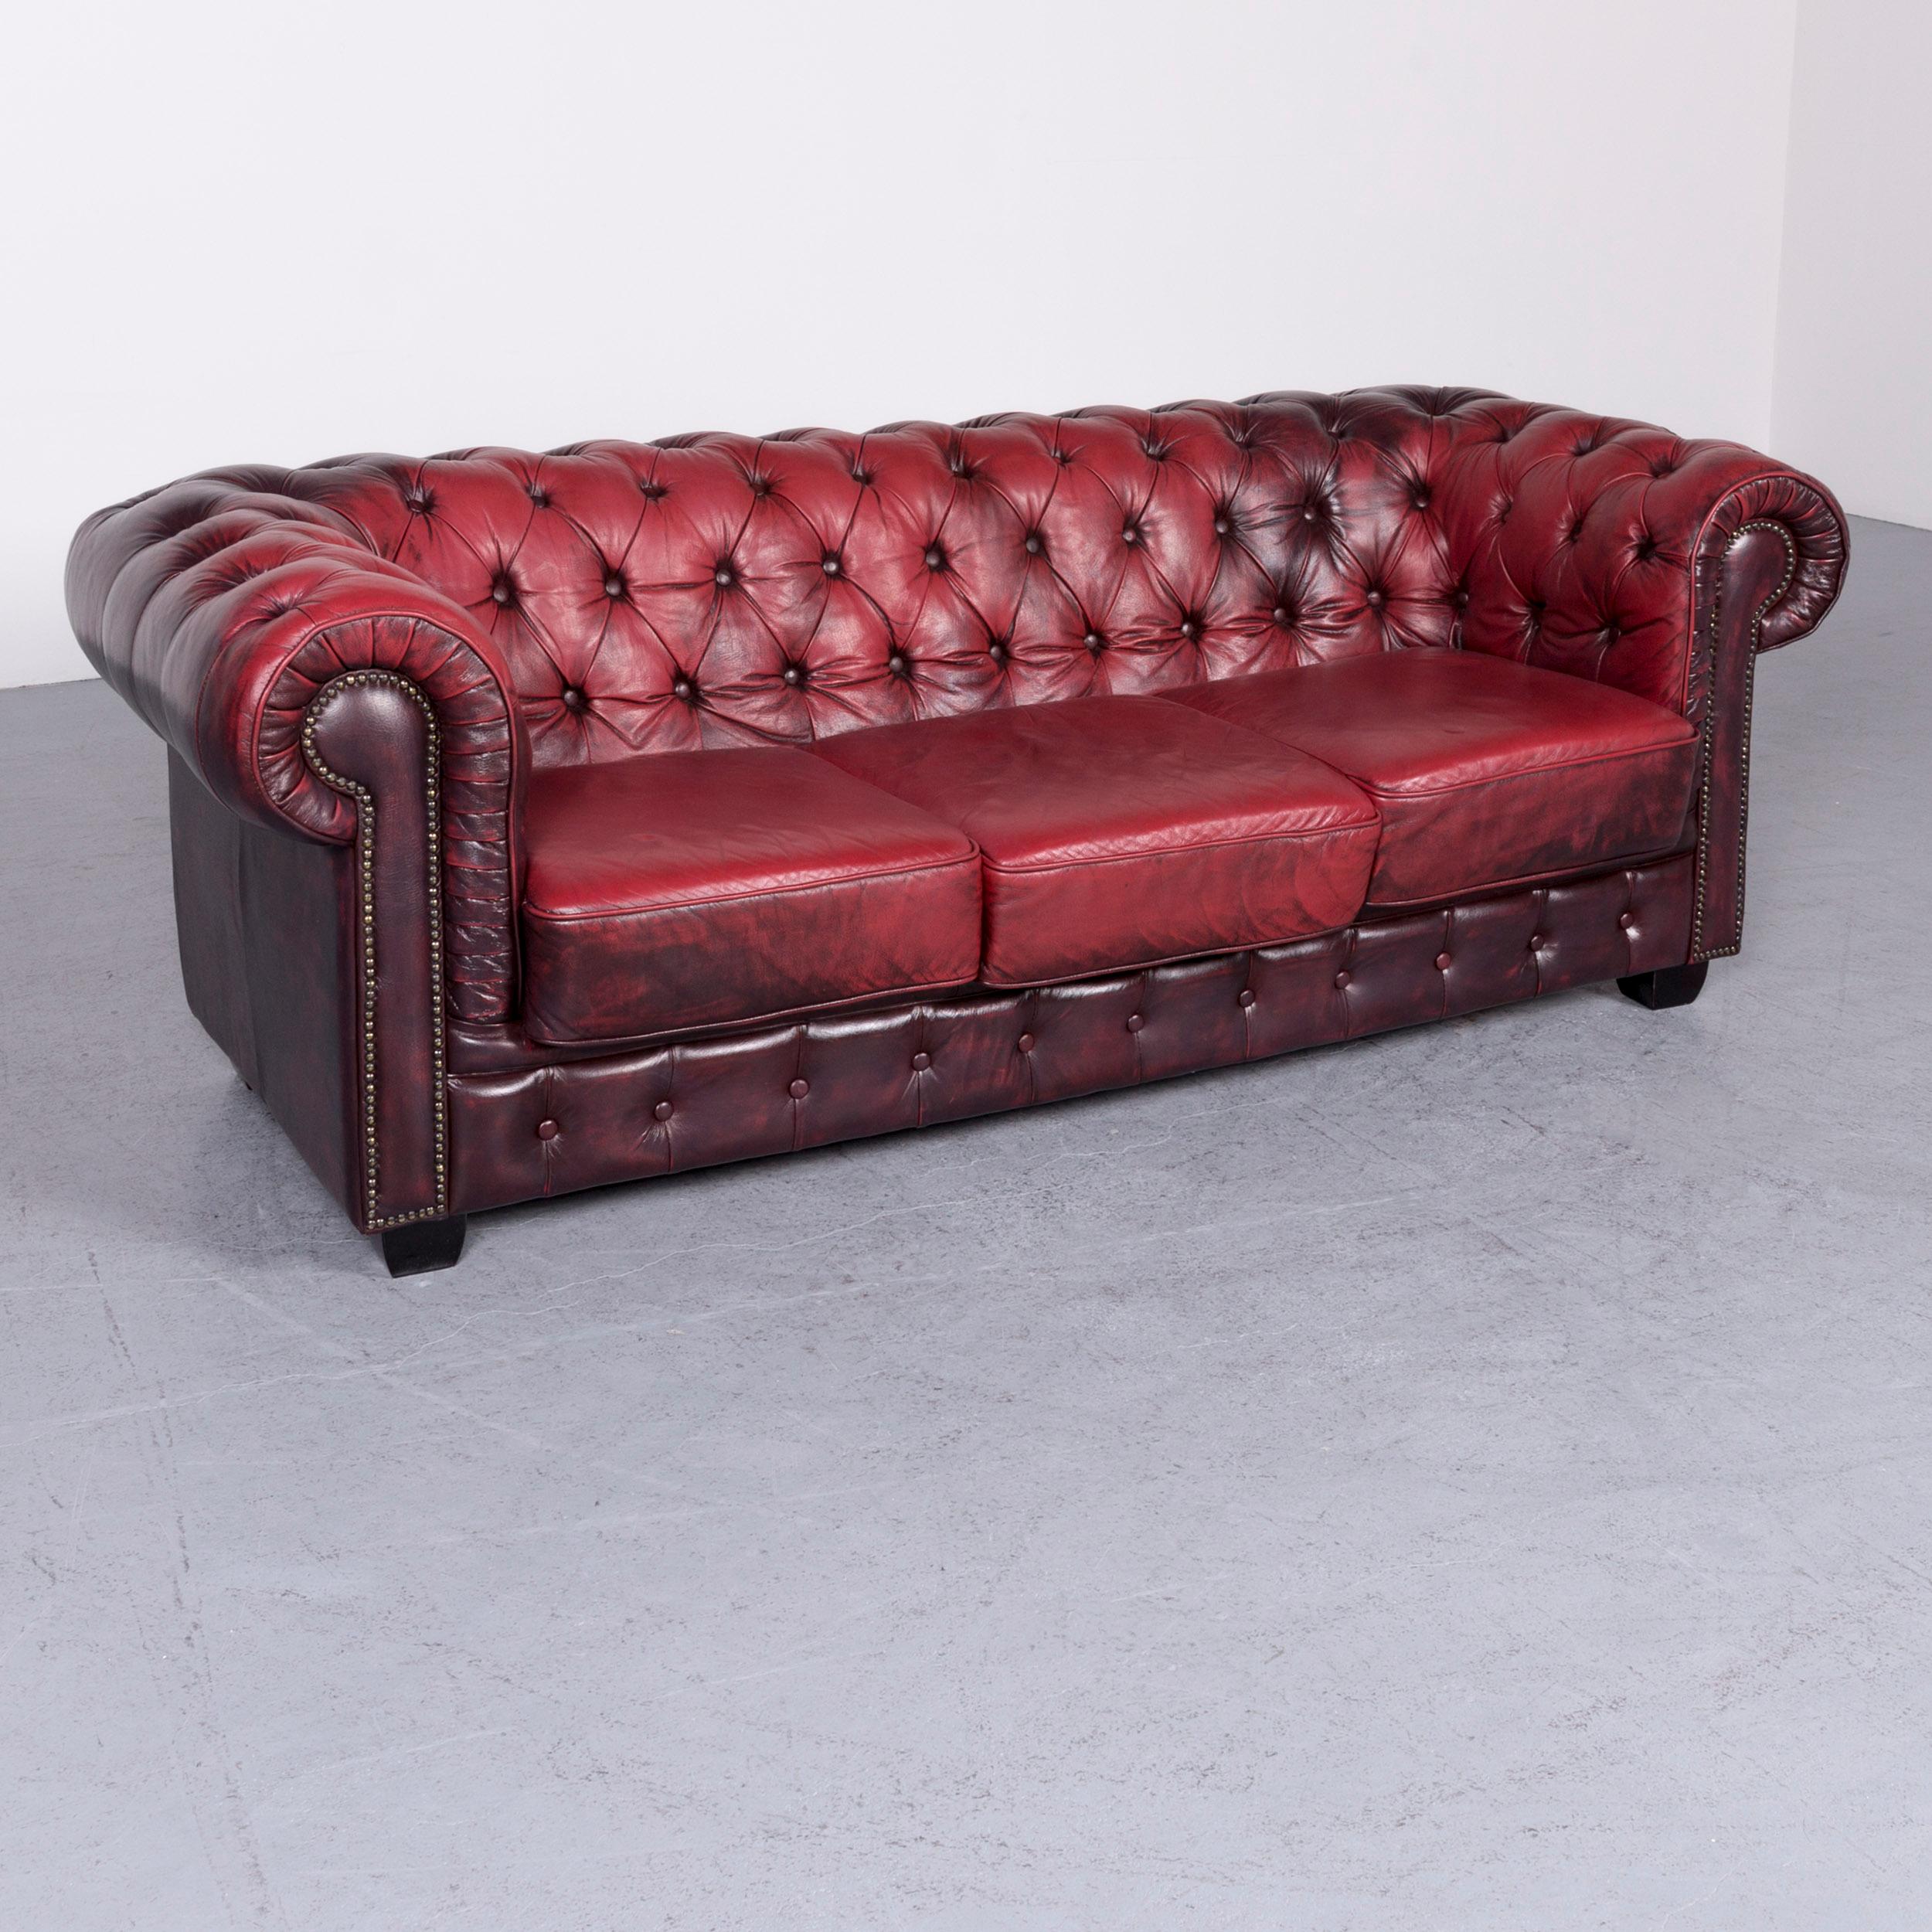 British Chesterfield Leather Sofa Set Red Two-Seat Three-Seat Vintage Couch